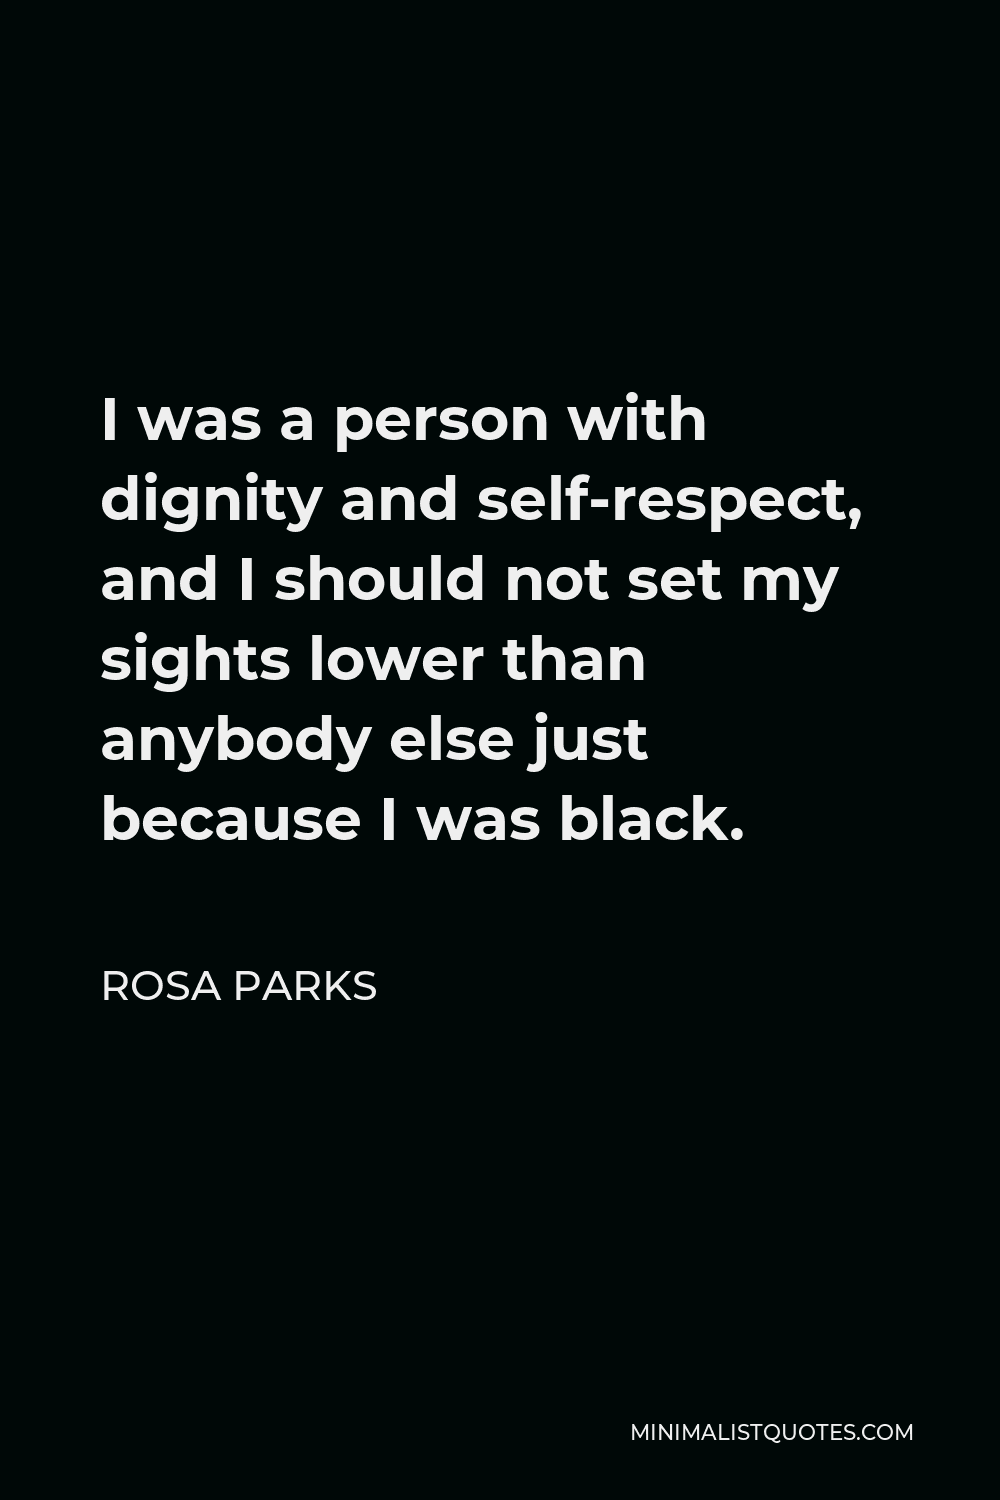 Rosa Parks Quote - I was a person with dignity and self-respect, and I should not set my sights lower than anybody else just because I was black.